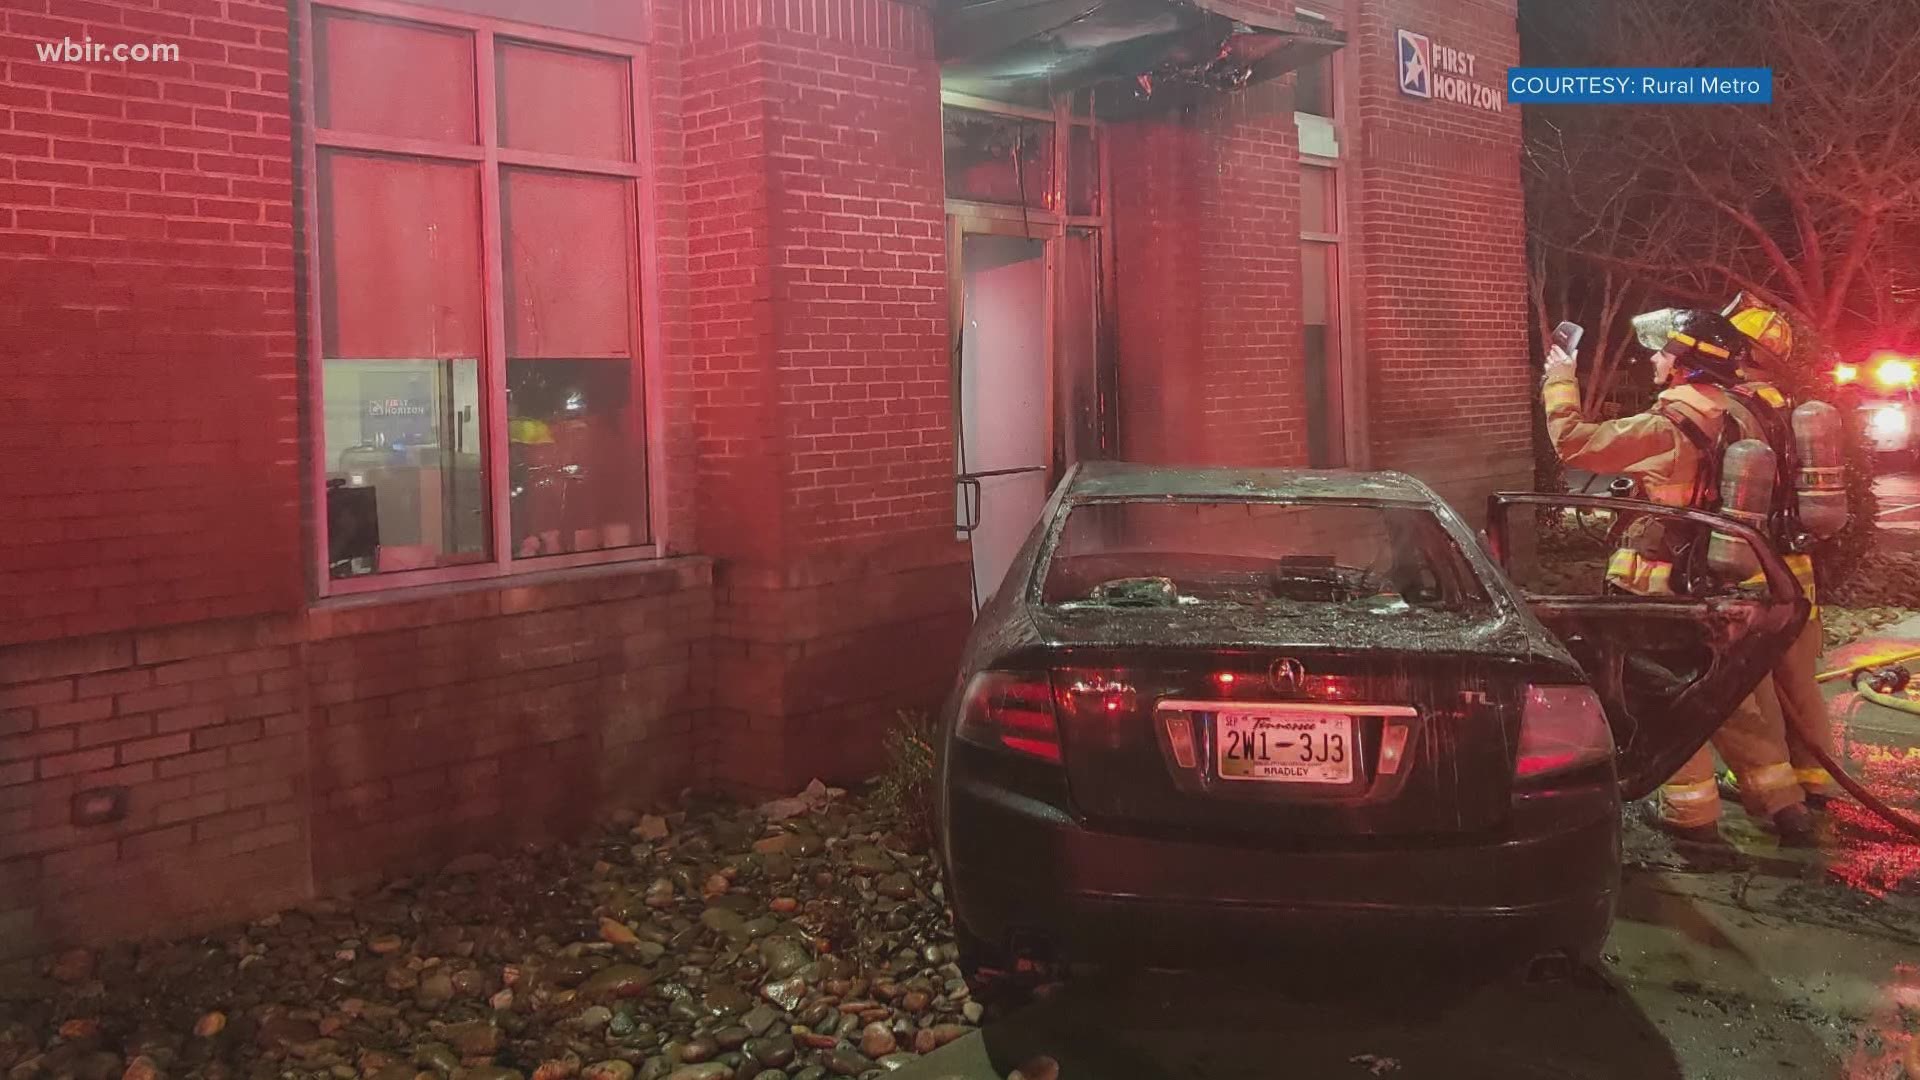 When crews arrived, they discovered the car crashed into the front door of the First Horizon Bank and burst into flames. Officials said the driver left the scene.